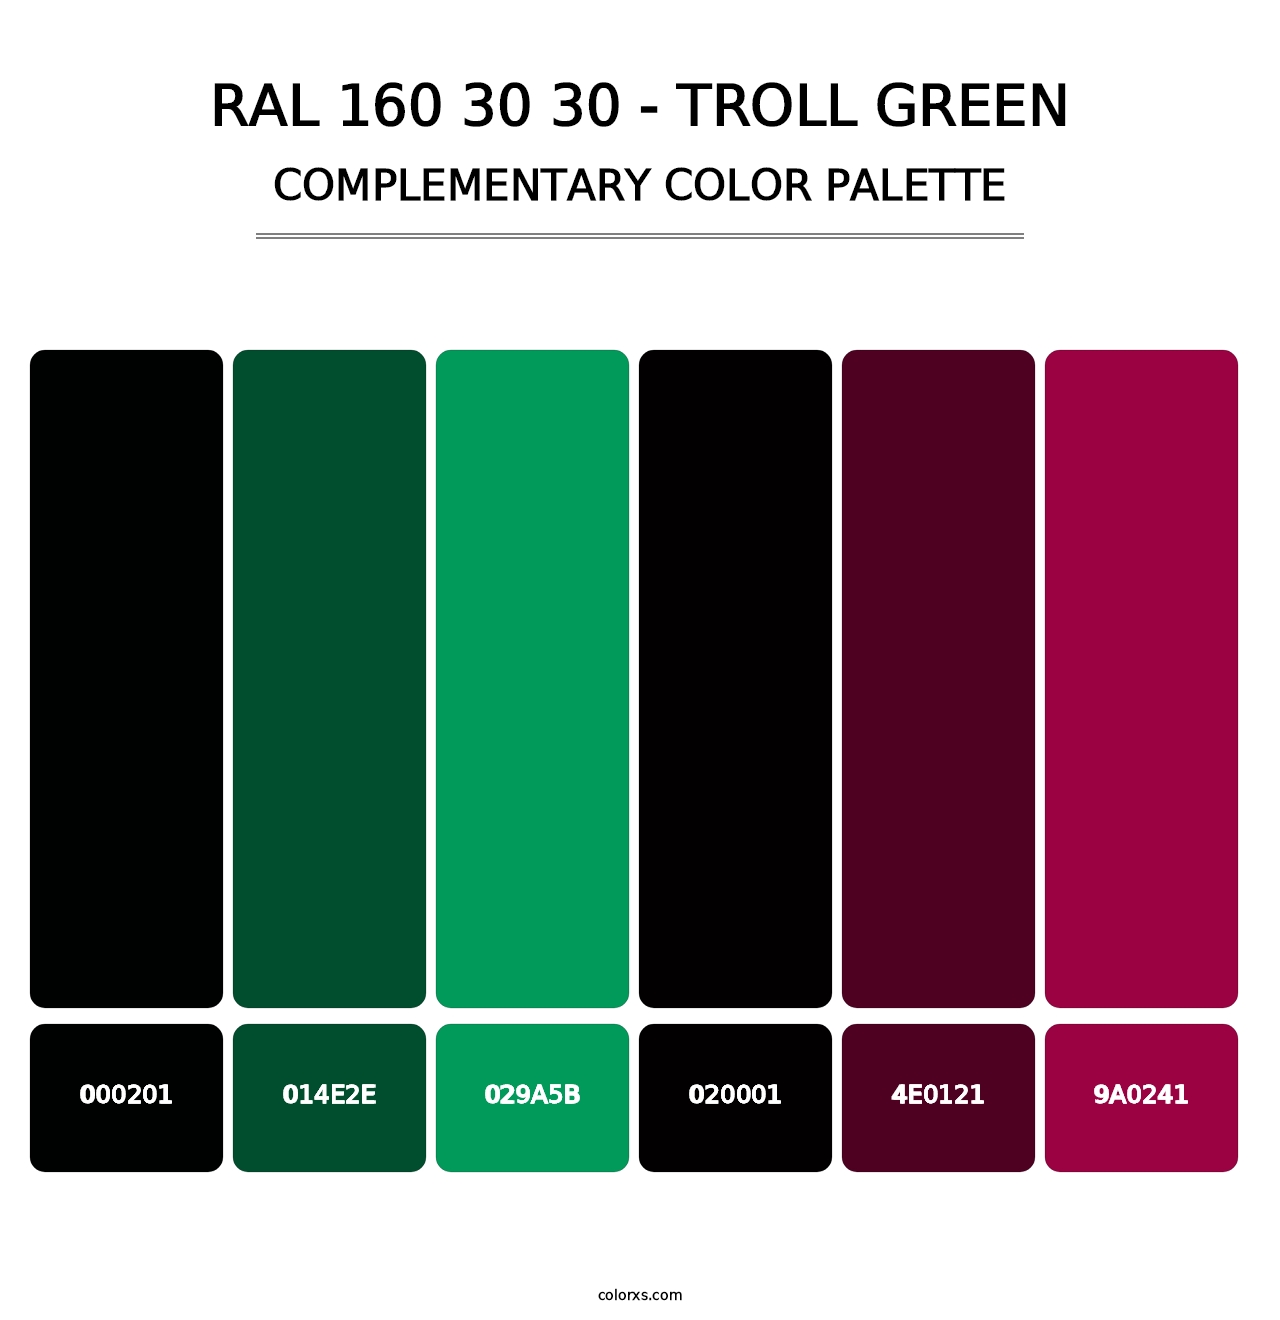 RAL 160 30 30 - Troll Green - Complementary Color Palette